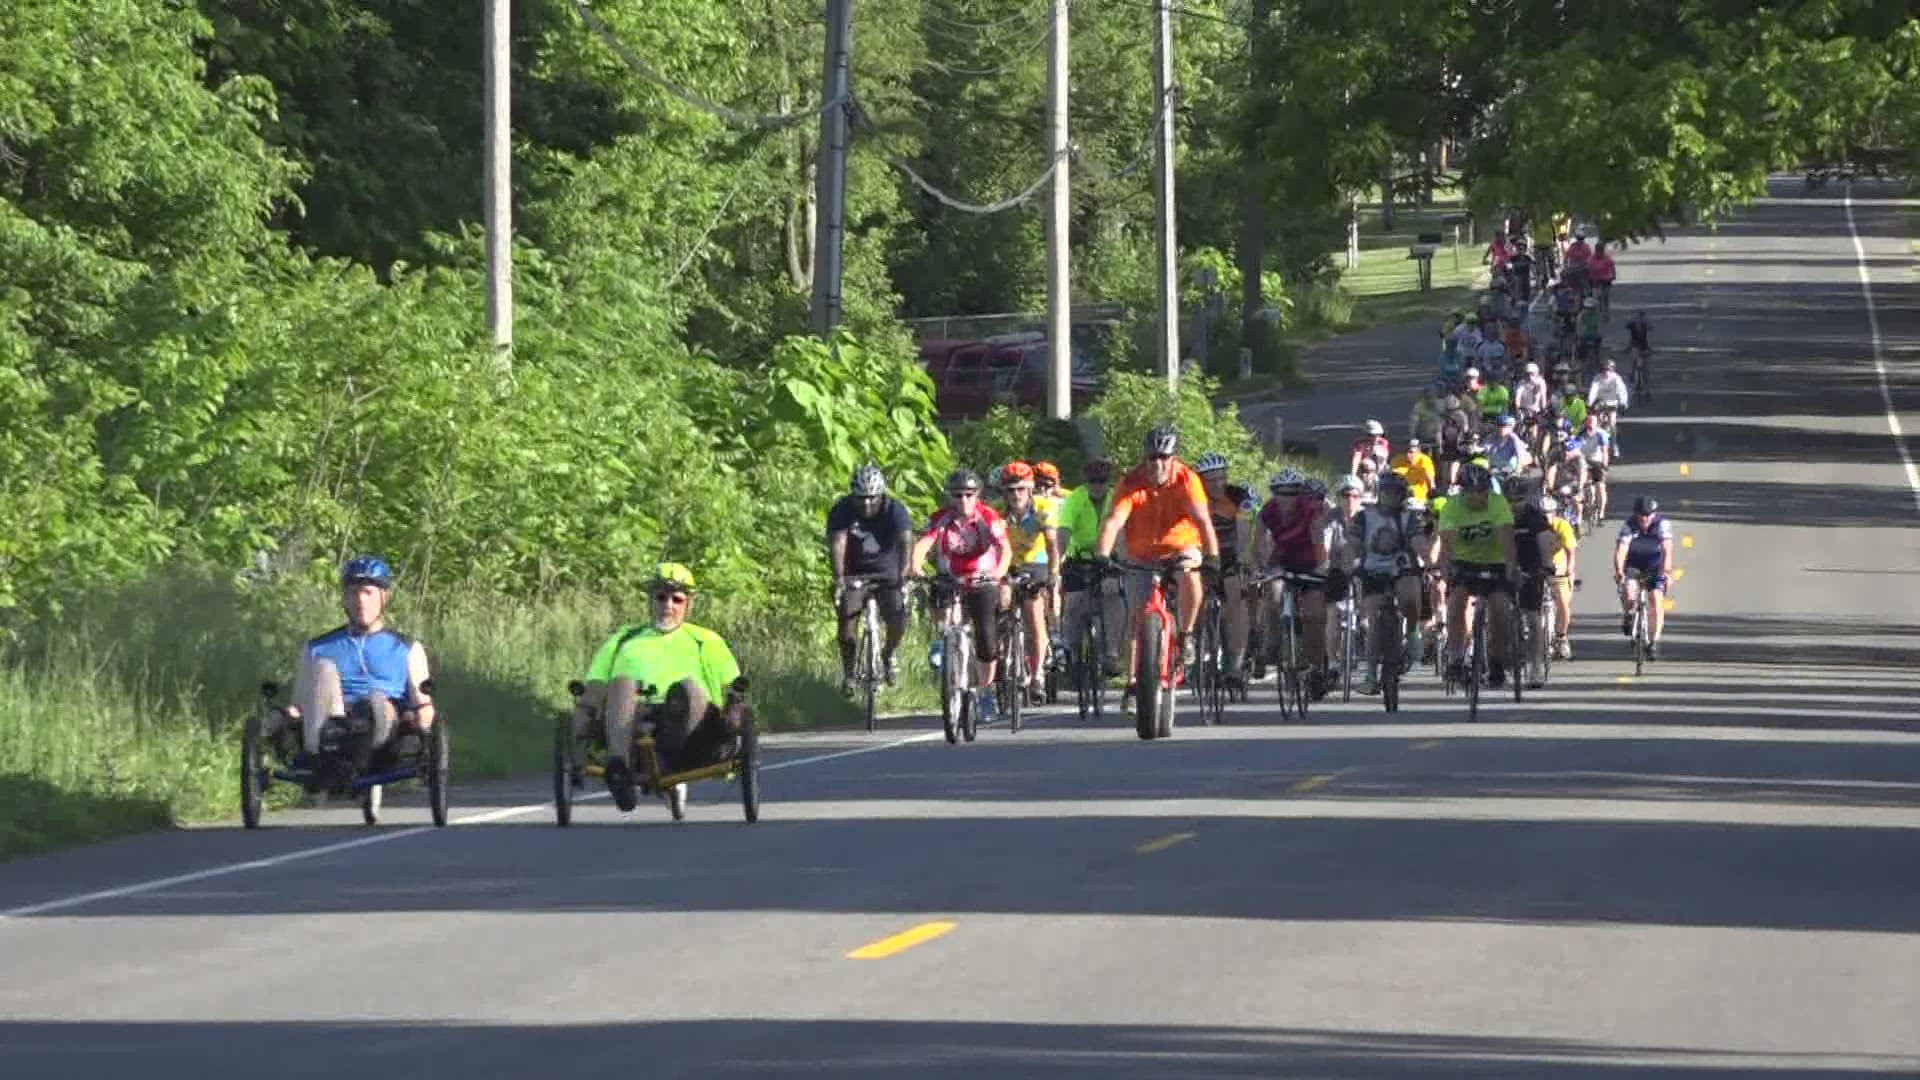 Yesterday marked five years since the tragic deaths of five cyclists killed near Kalamazoo.